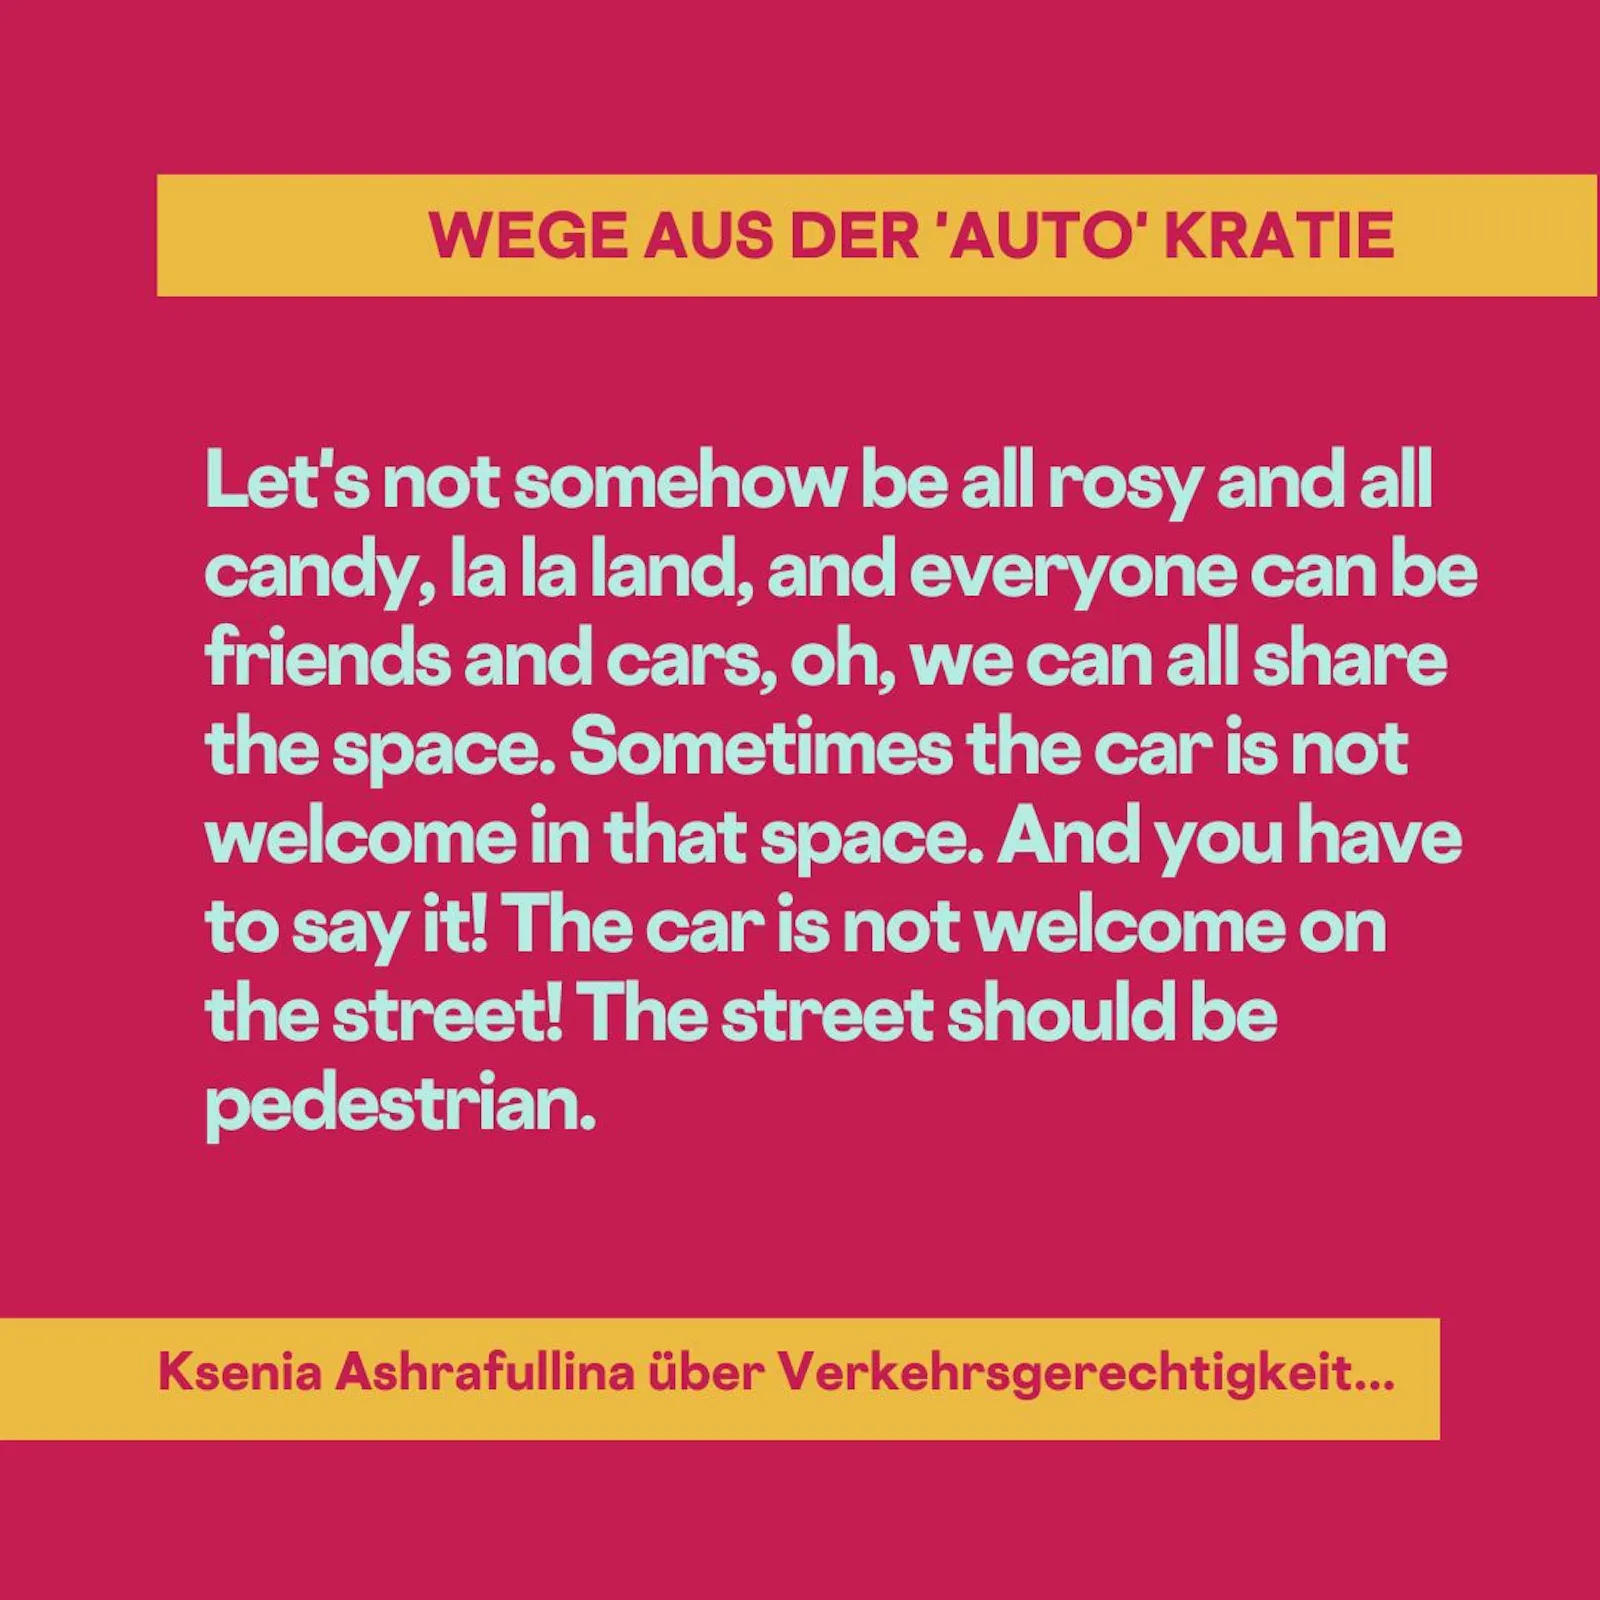 Let's not somehow be all rosy and all candy, la la land, and everyone can be friends and cars, oh, we can all share the space. Sometimes the car is not welcome in that space. And you have to say it! The car is not welcome on the street! The street should be pedestrian.